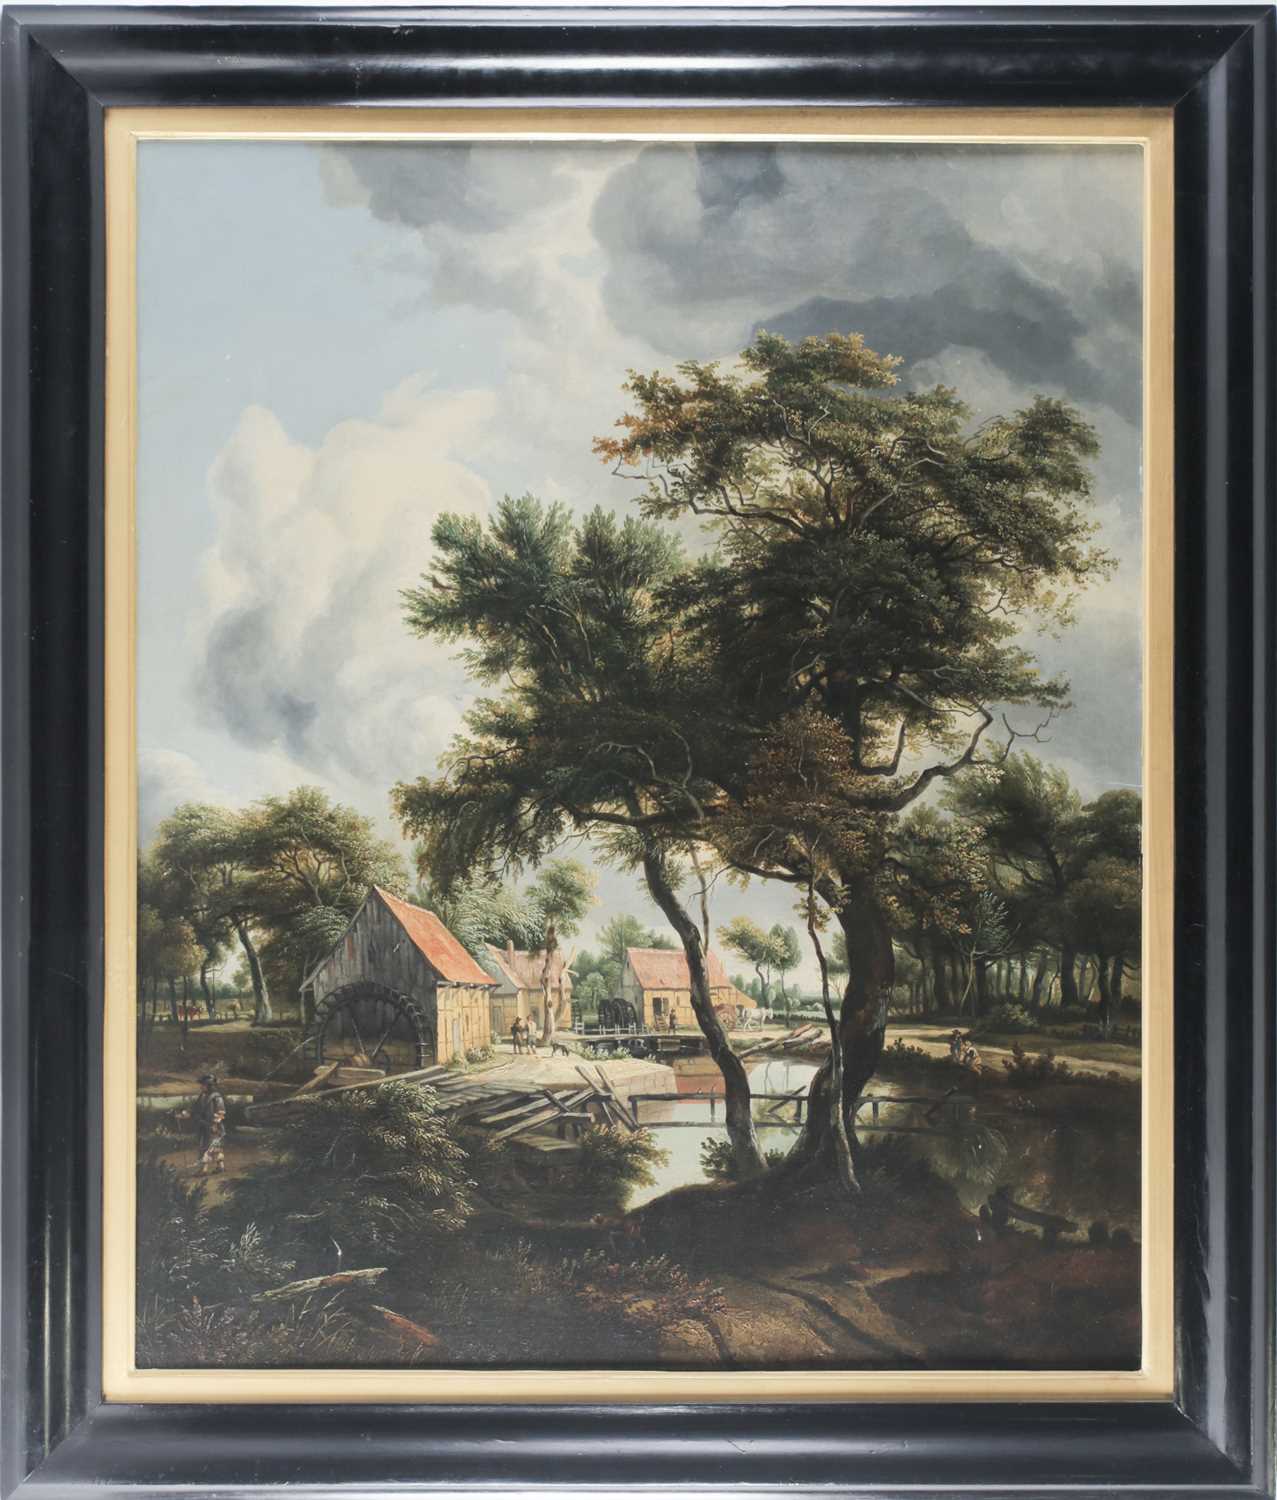 Early 20th century school, a watermill in a rural setting, unsigned oil on canvas, 81 cm x 66 cm